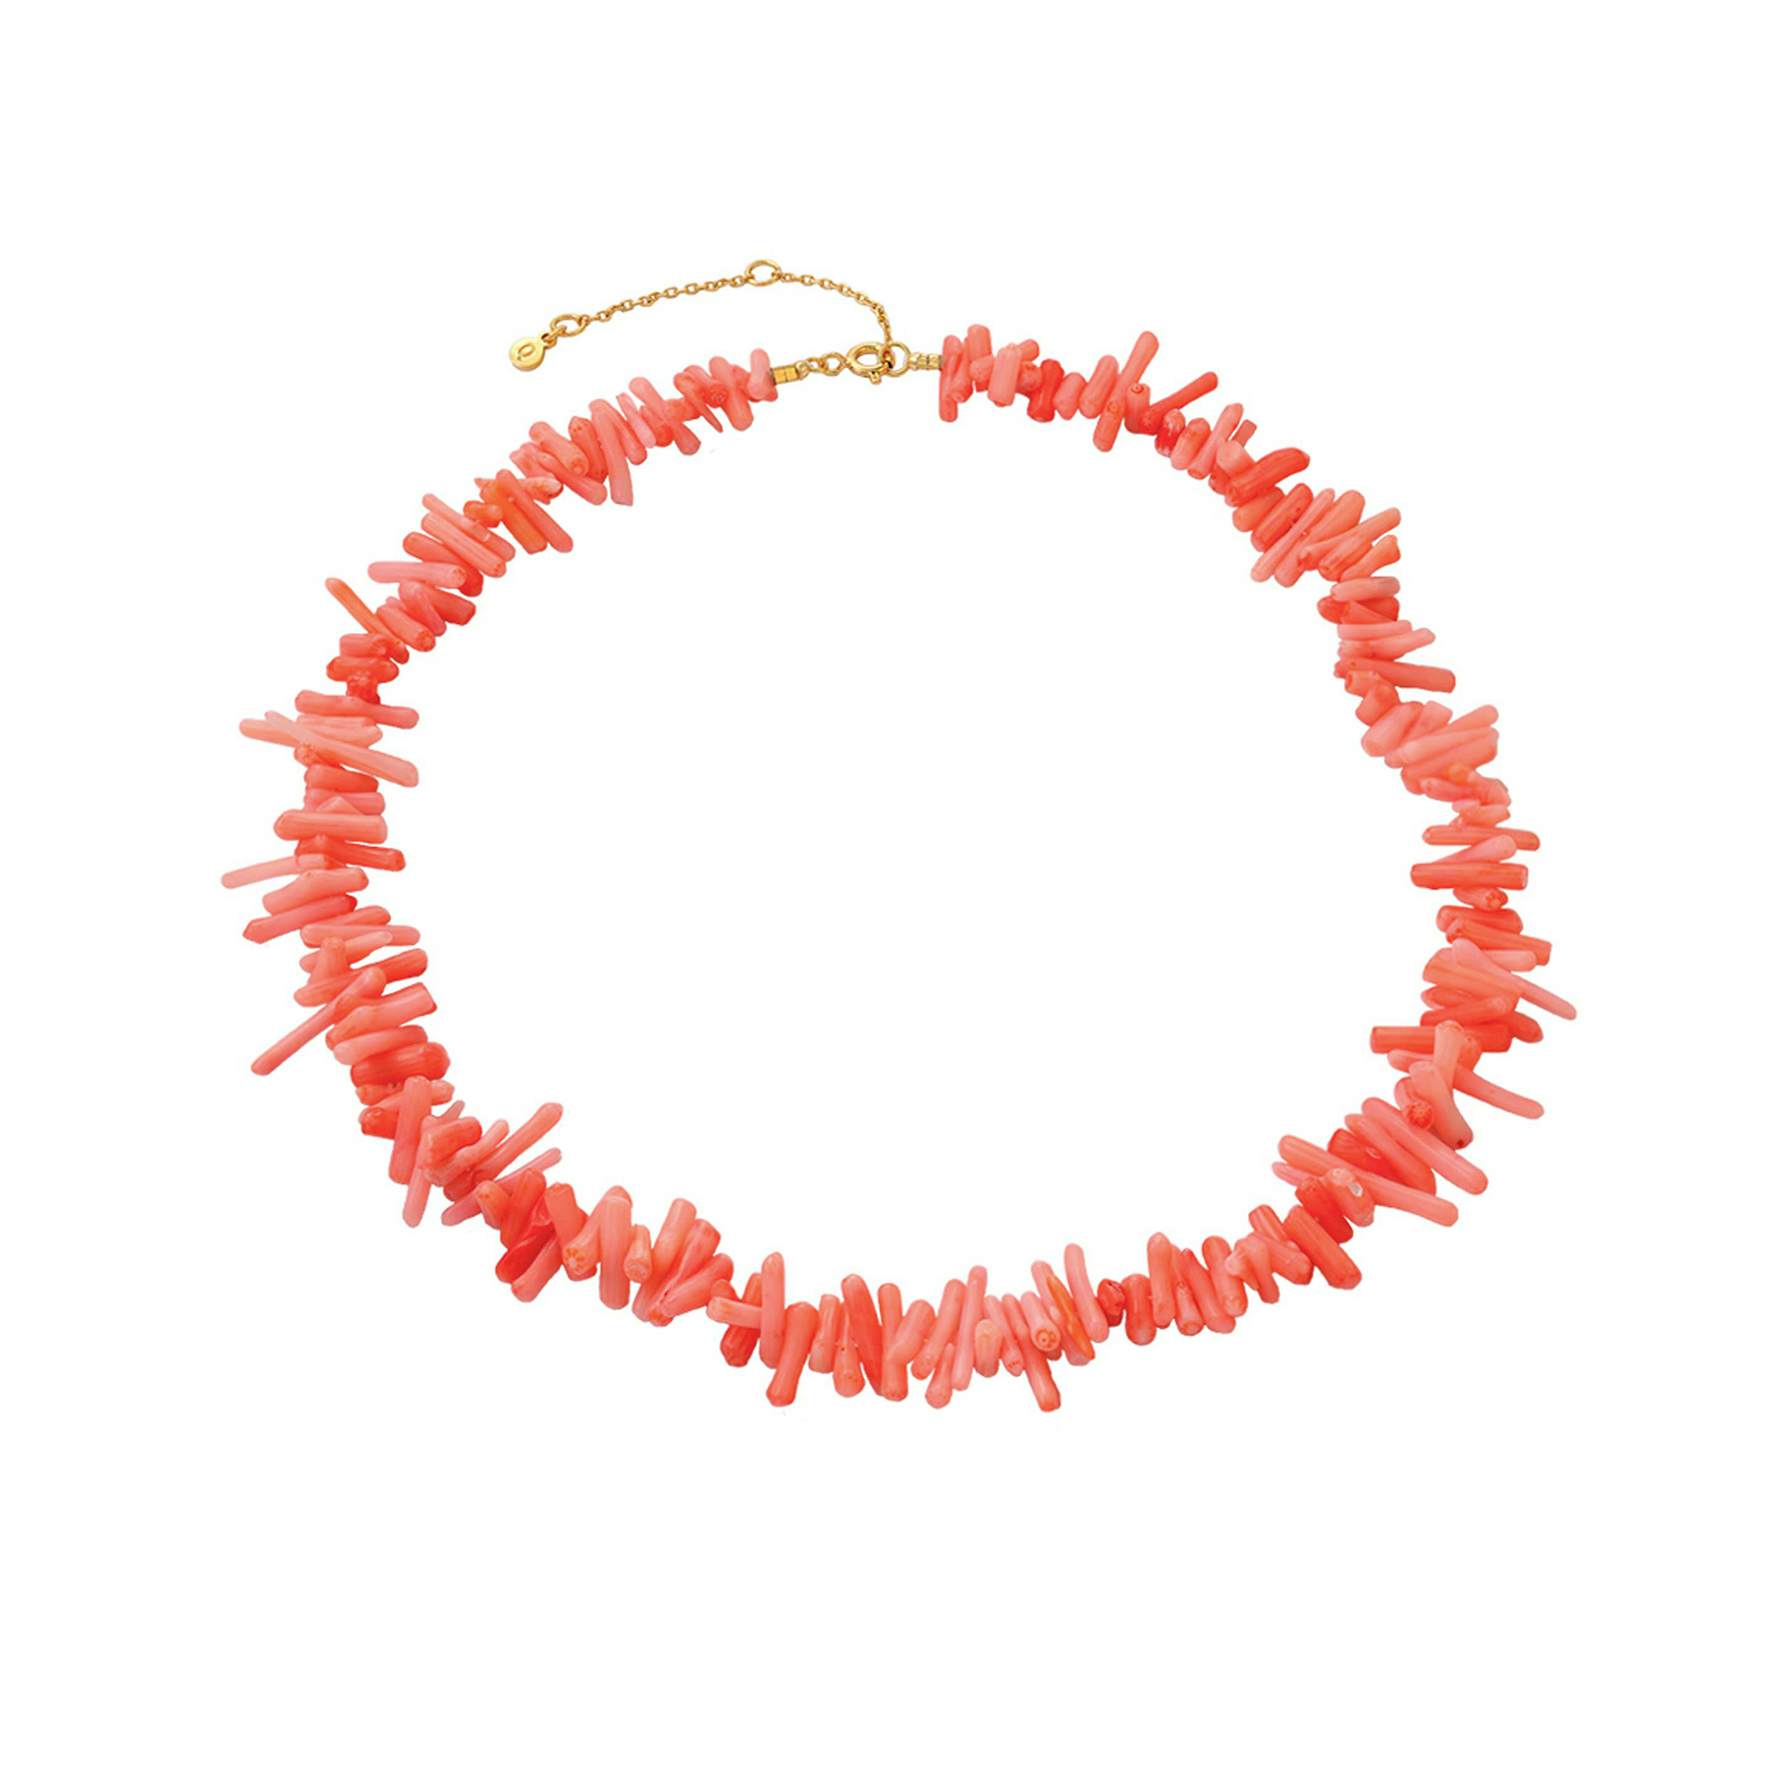 Elvira Necklace from Hultquist Copenhagen in Goldplated-Silver Sterling 925